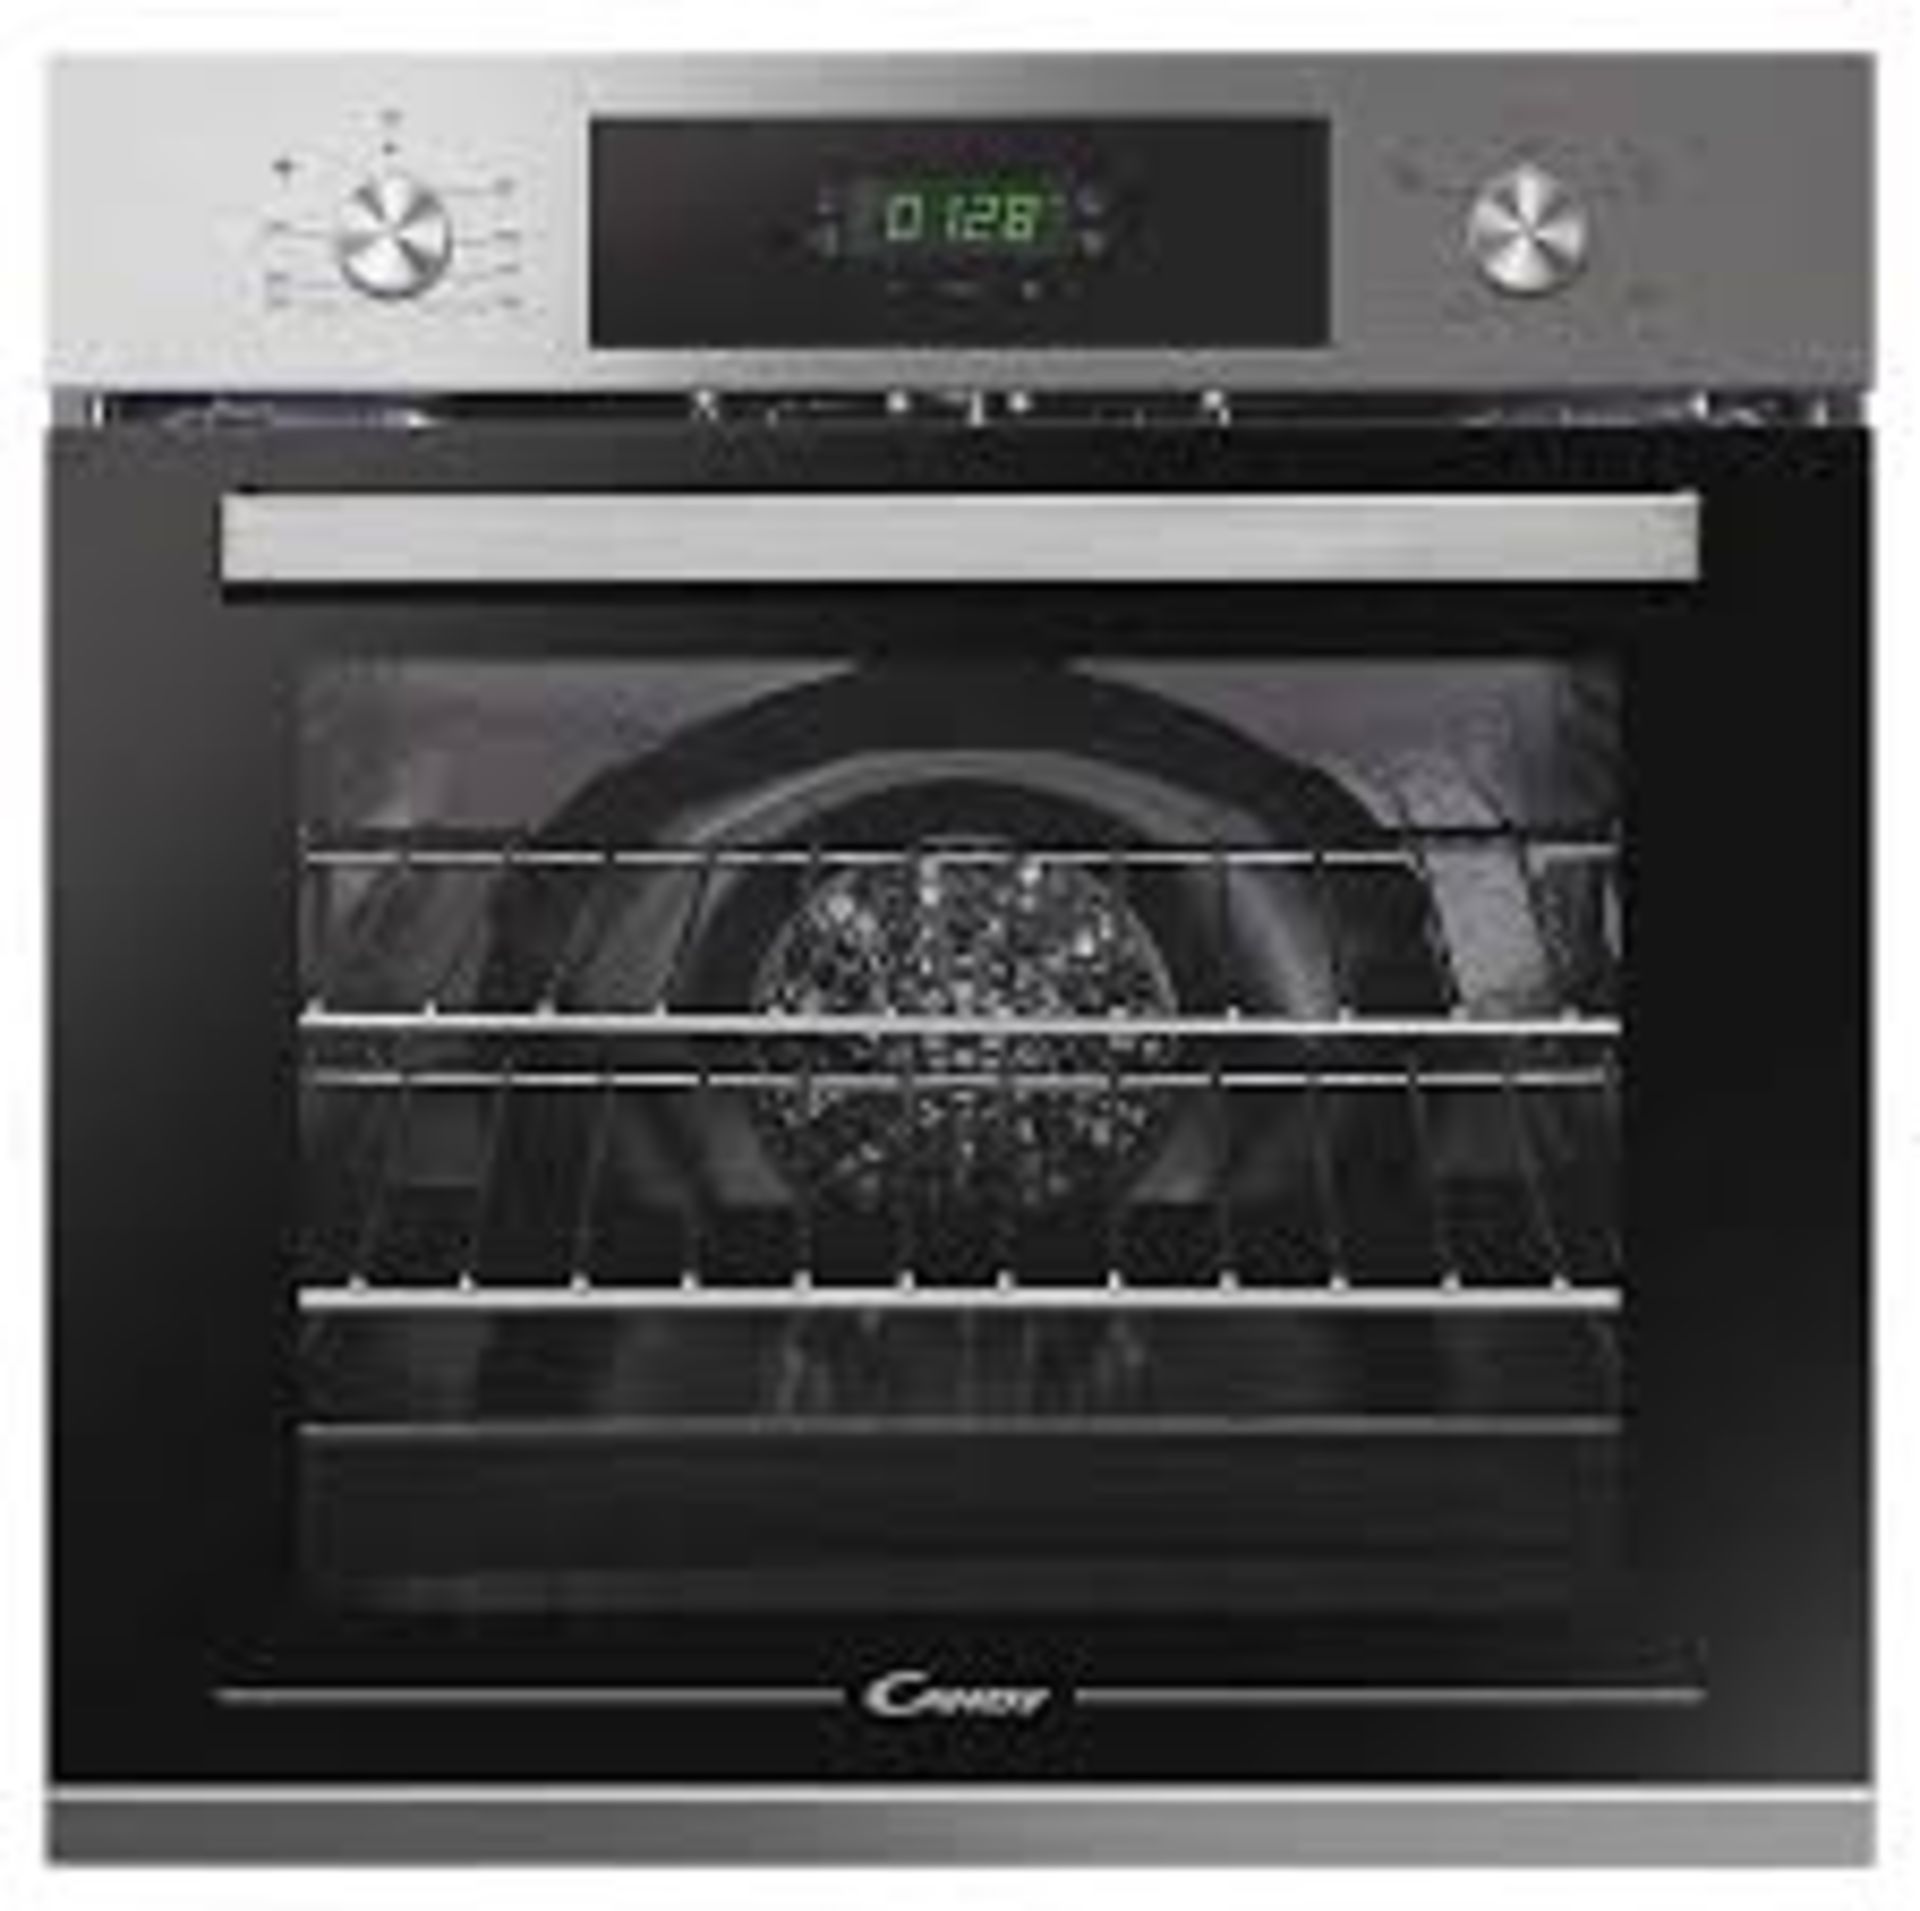 Candy Timeless FCT405X Built-in Single Fan Oven. - R19 *no door*